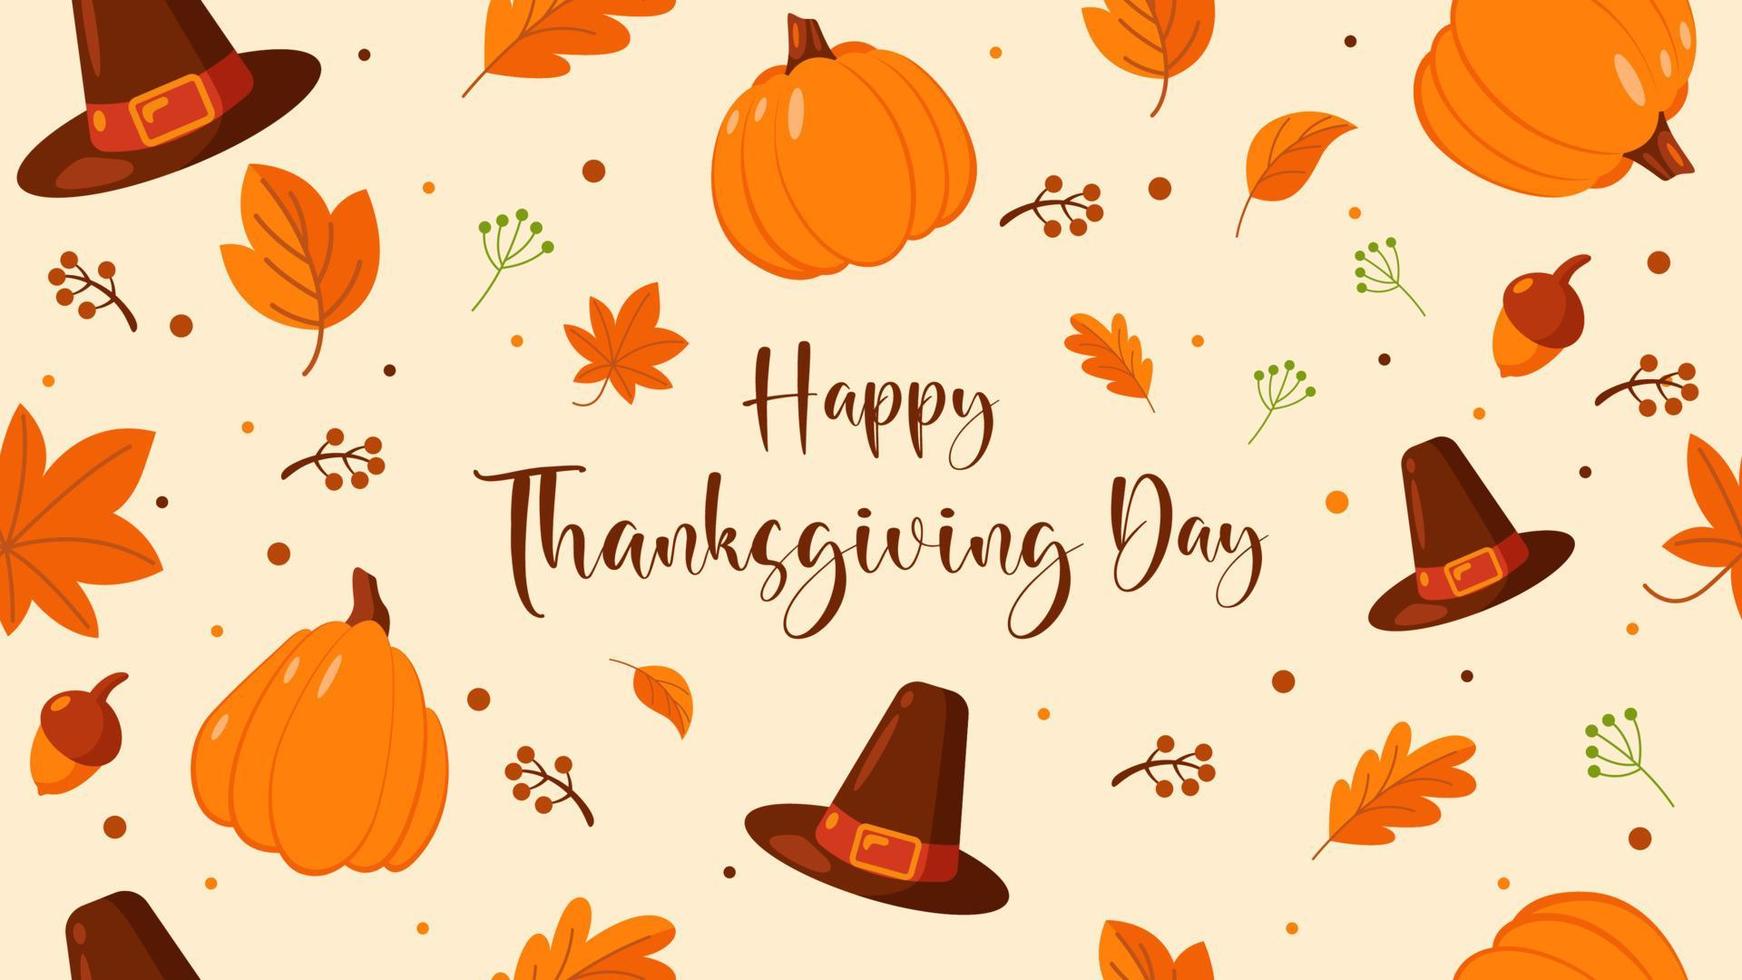 happy thanksgiving day background design in flat style illustration vector